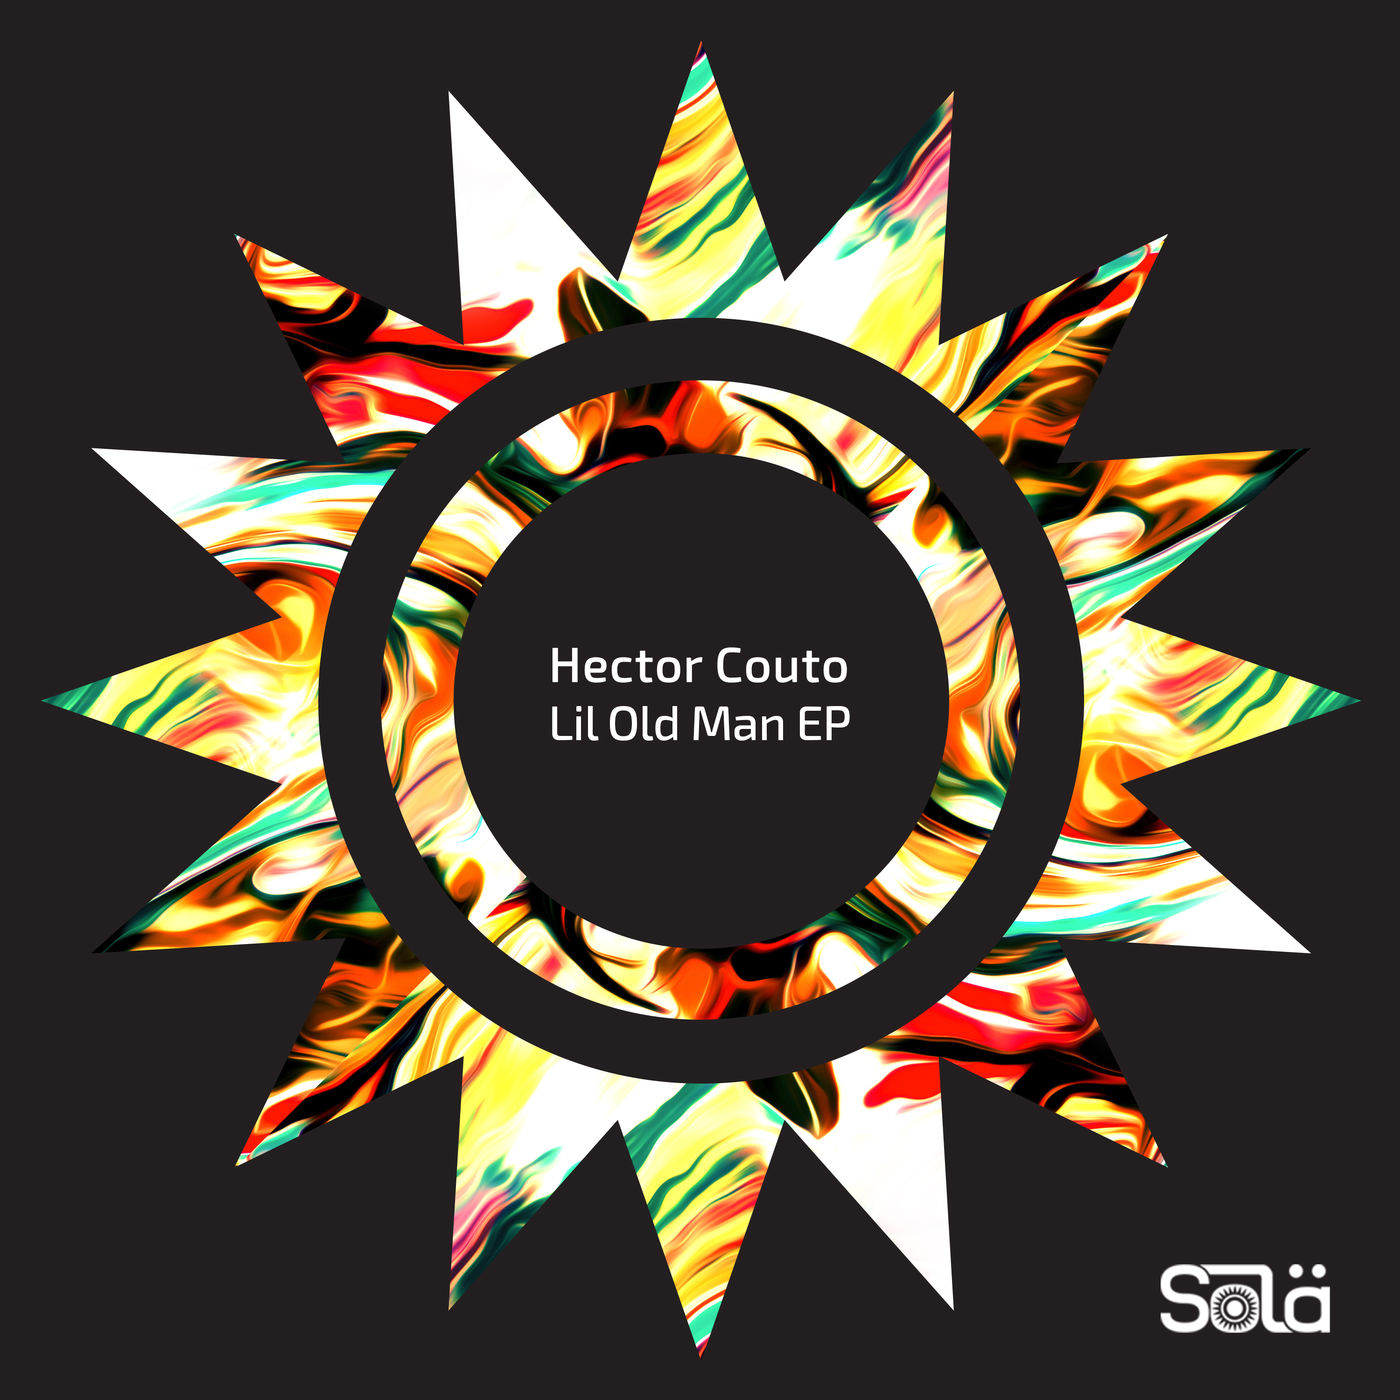 Hector Couto - Lil Old Man EP / Sola